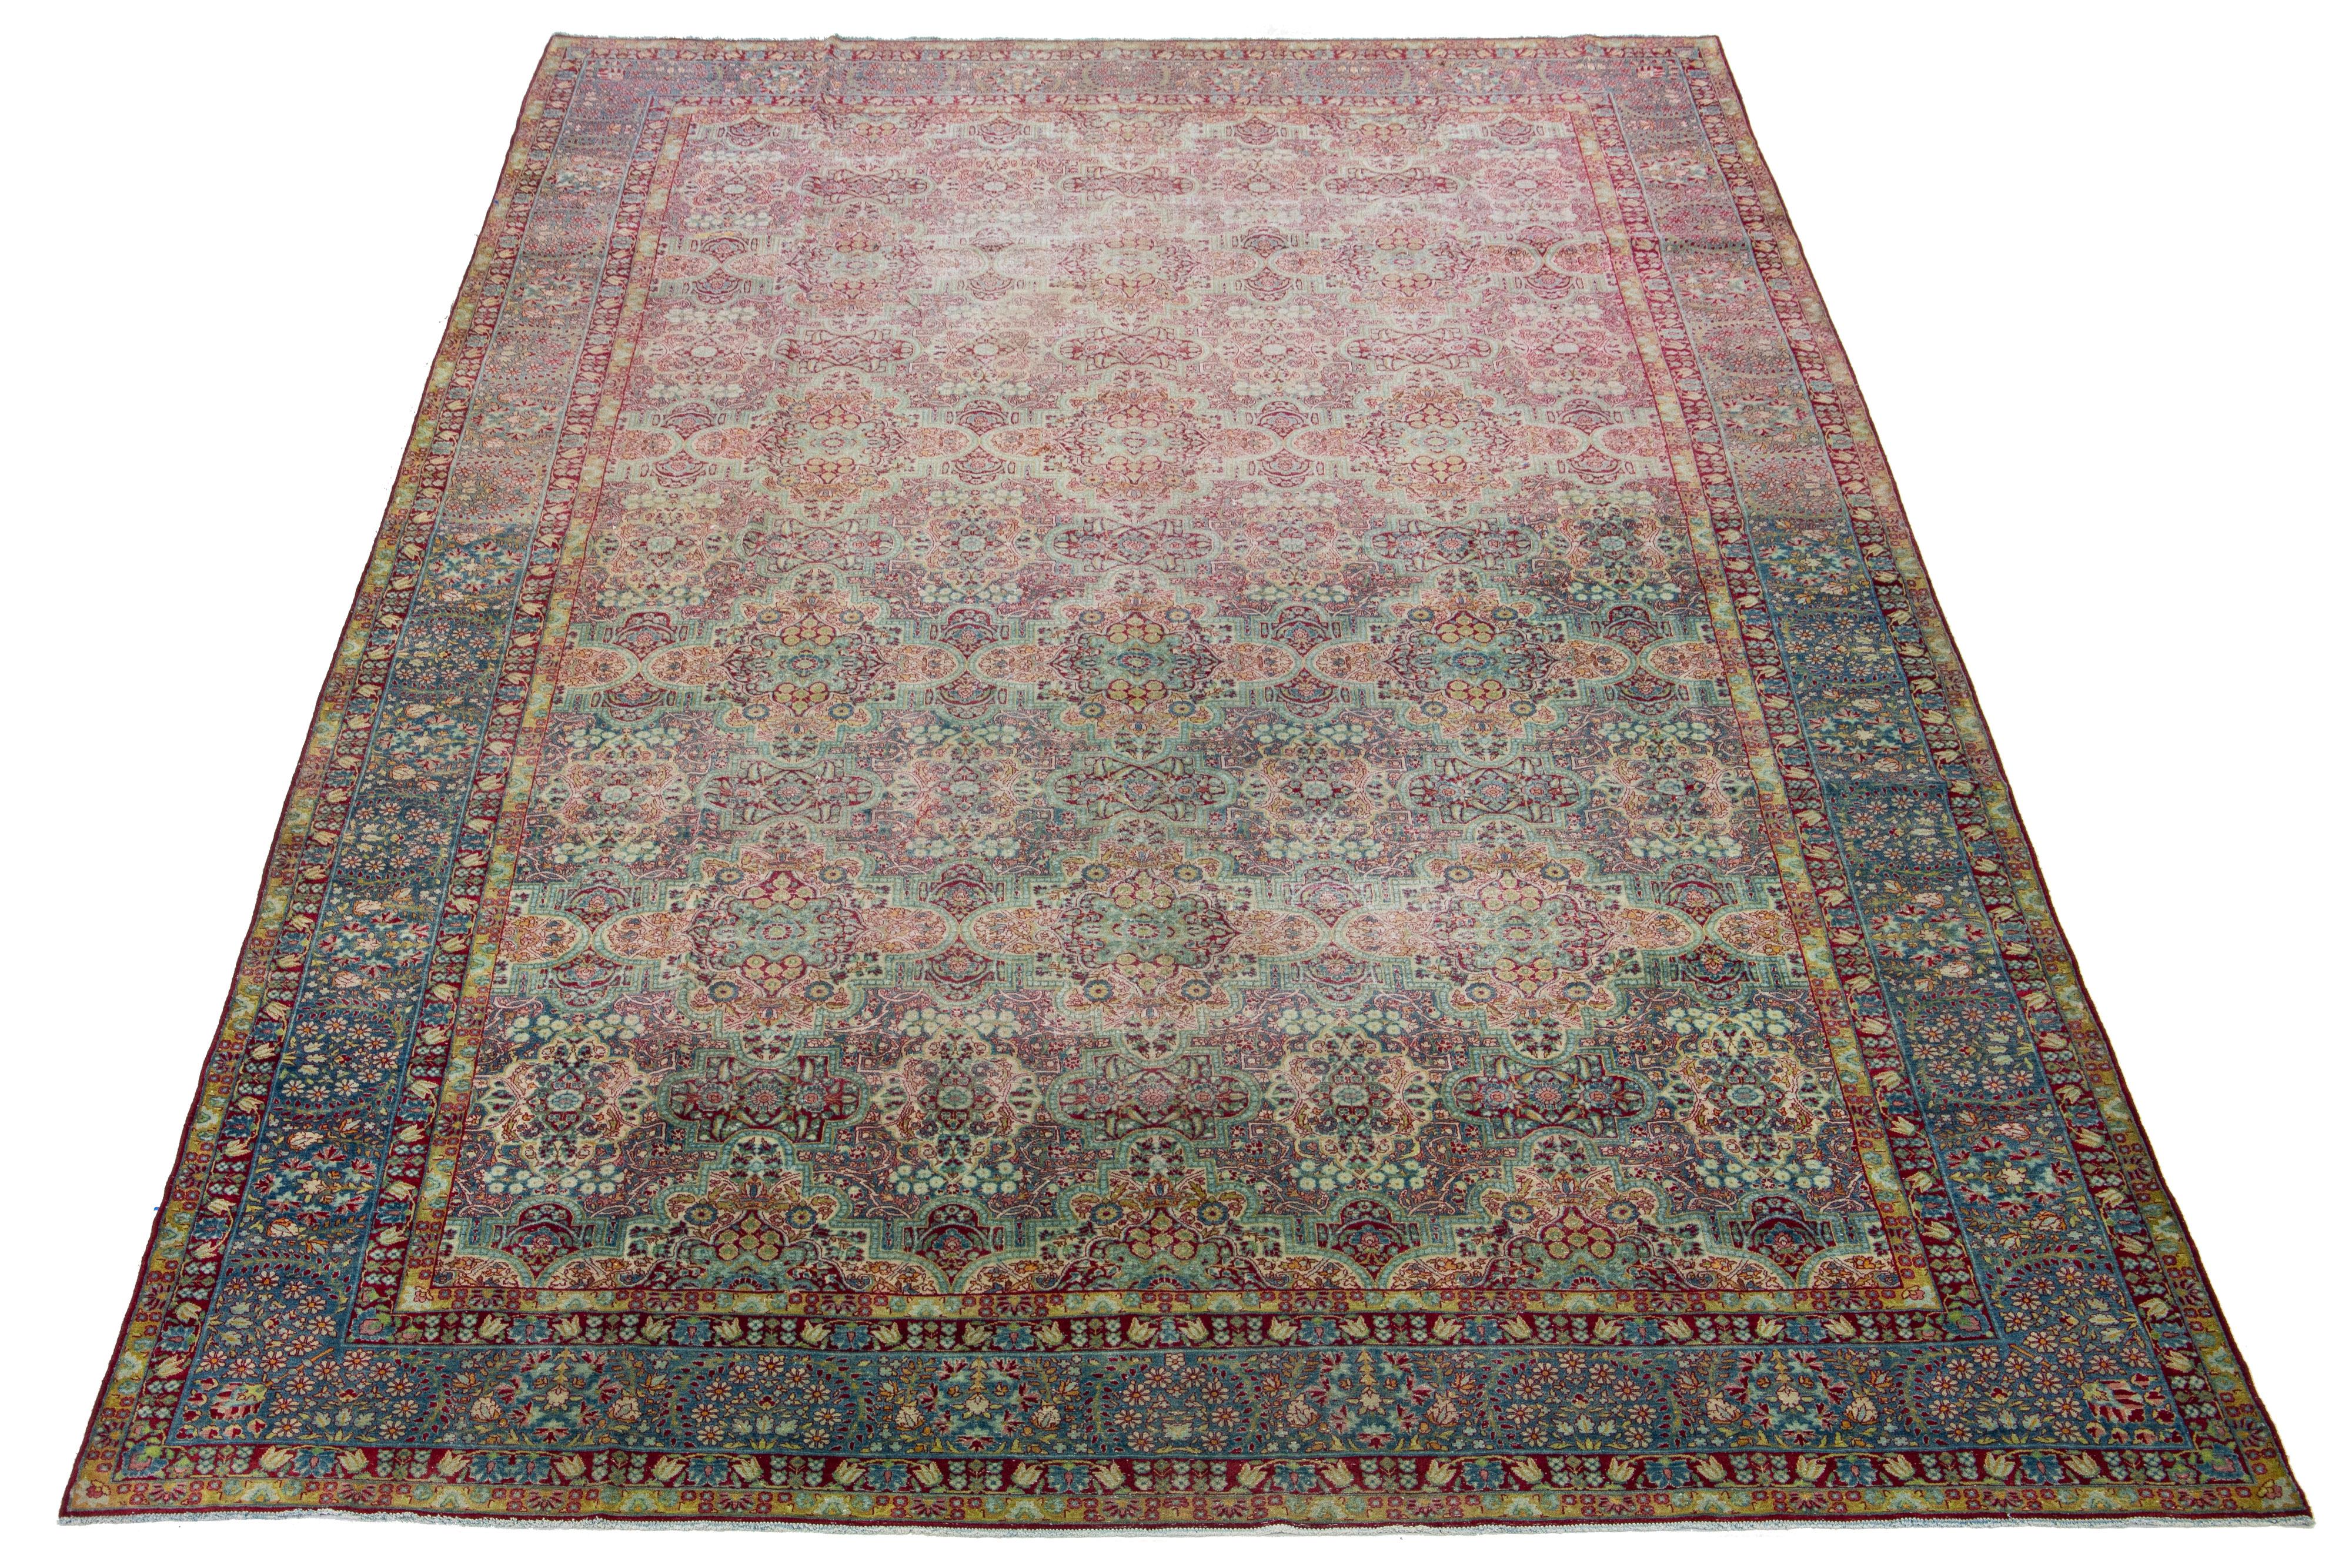 This Persian Tabriz wool rug is handcrafted and showcases a captivating traditional floral pattern. The mesmerizing contrast of the blue background and the exquisite red floral design enhances its charm.

This rug measures 10'10